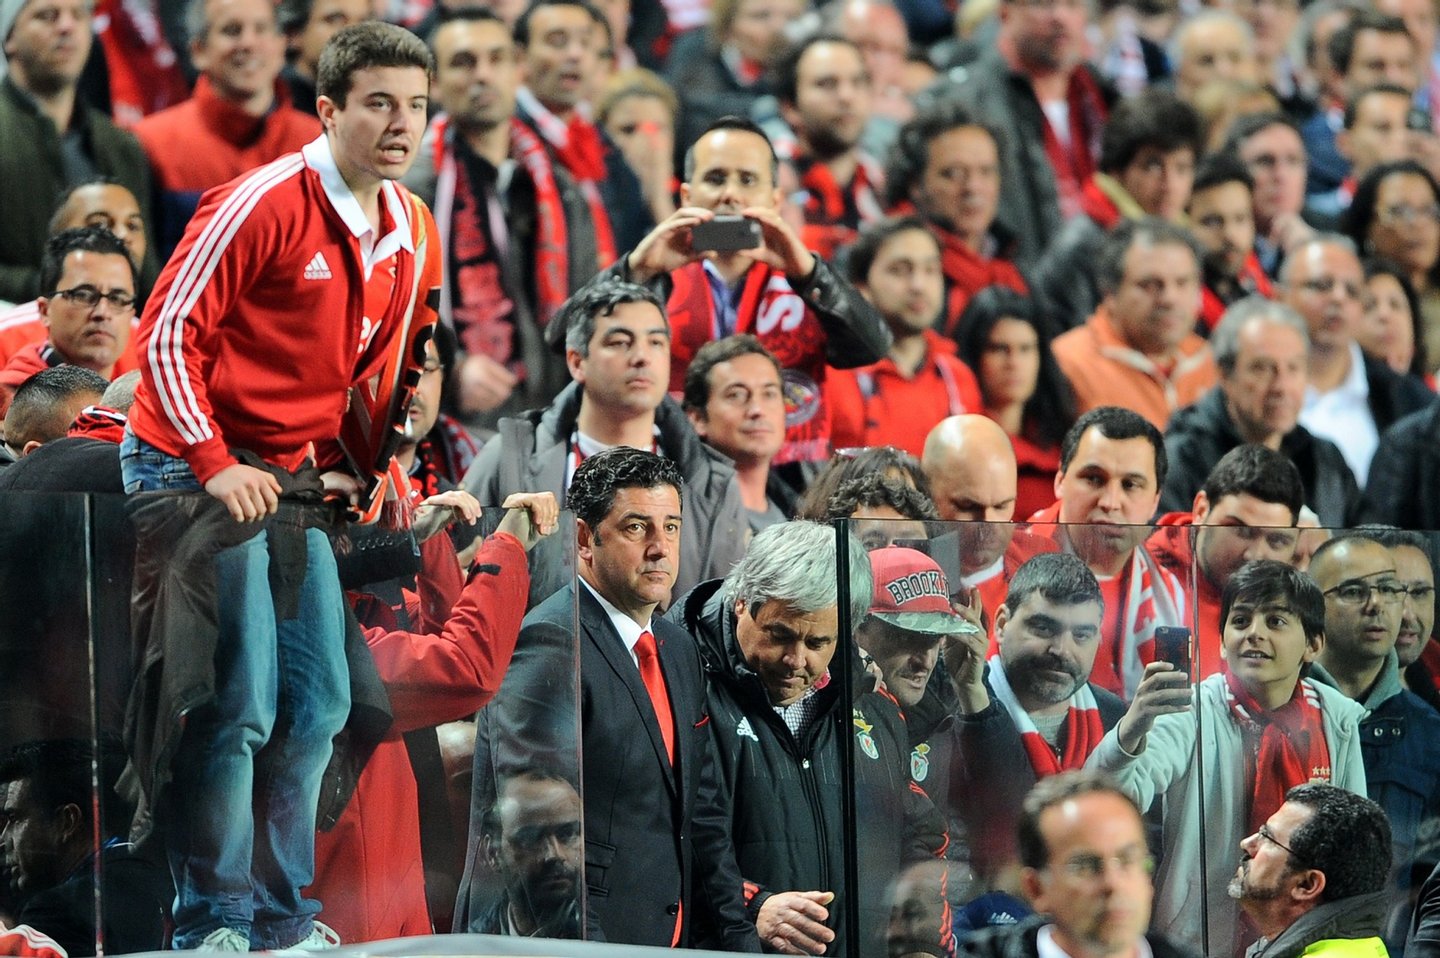 LISBON, PORTUGAL - APRIL 13: Rui VitÃ³ria, SL Benfica coach after being expelled watch the game on the bench with the public during the UEFA Champions league Quarter Final Second Leg match between SL Benfica and FC Bayern Muenchen at Estadio da Luz on April 13, 2016 in Lisbon, Portugal. (Photo by Octavio Passos/Getty Images)